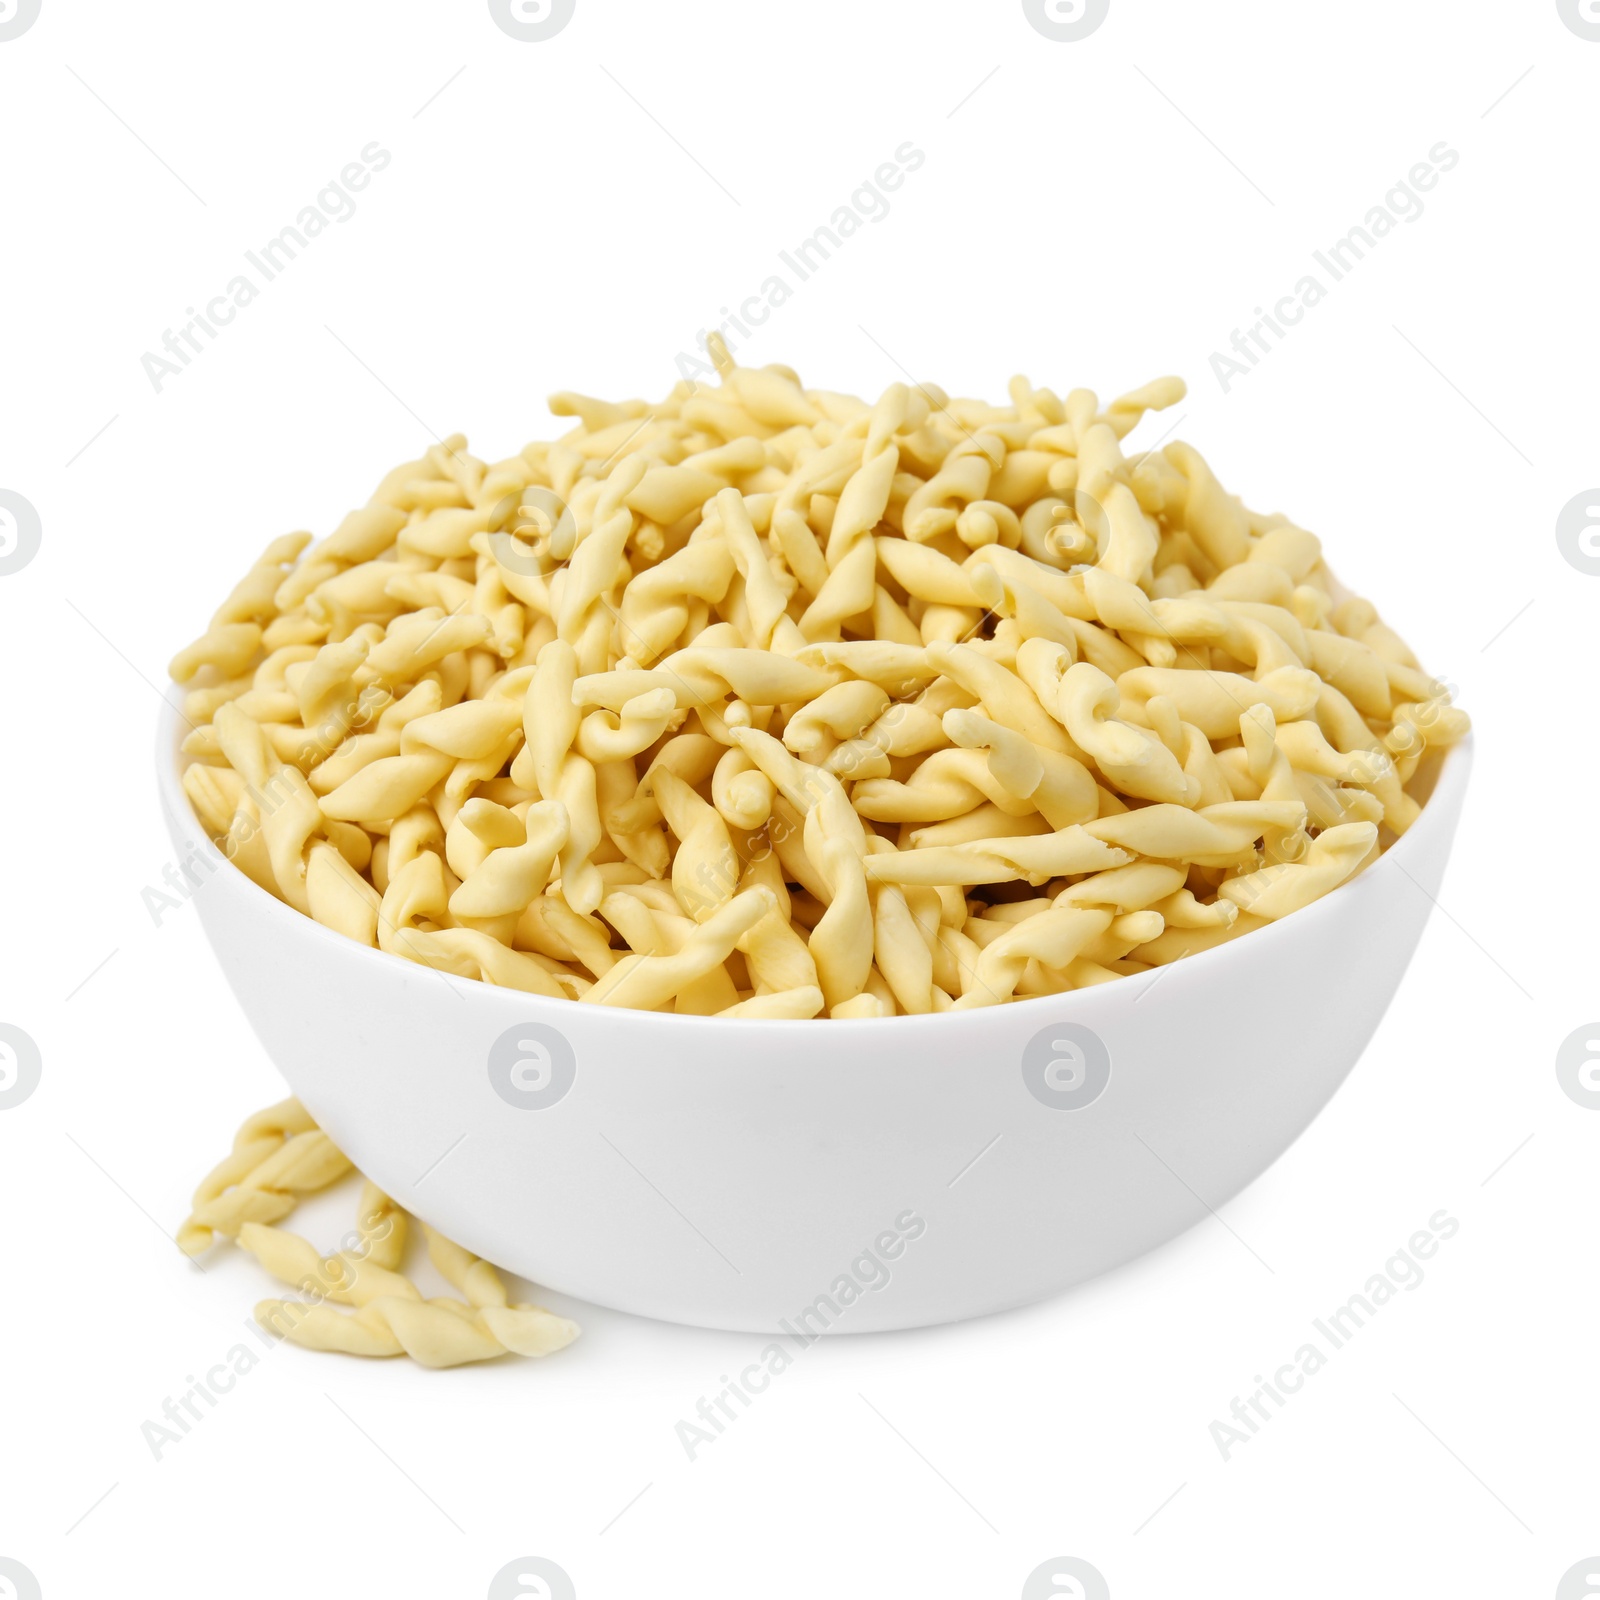 Photo of Bowl with uncooked trofie pasta isolated on white